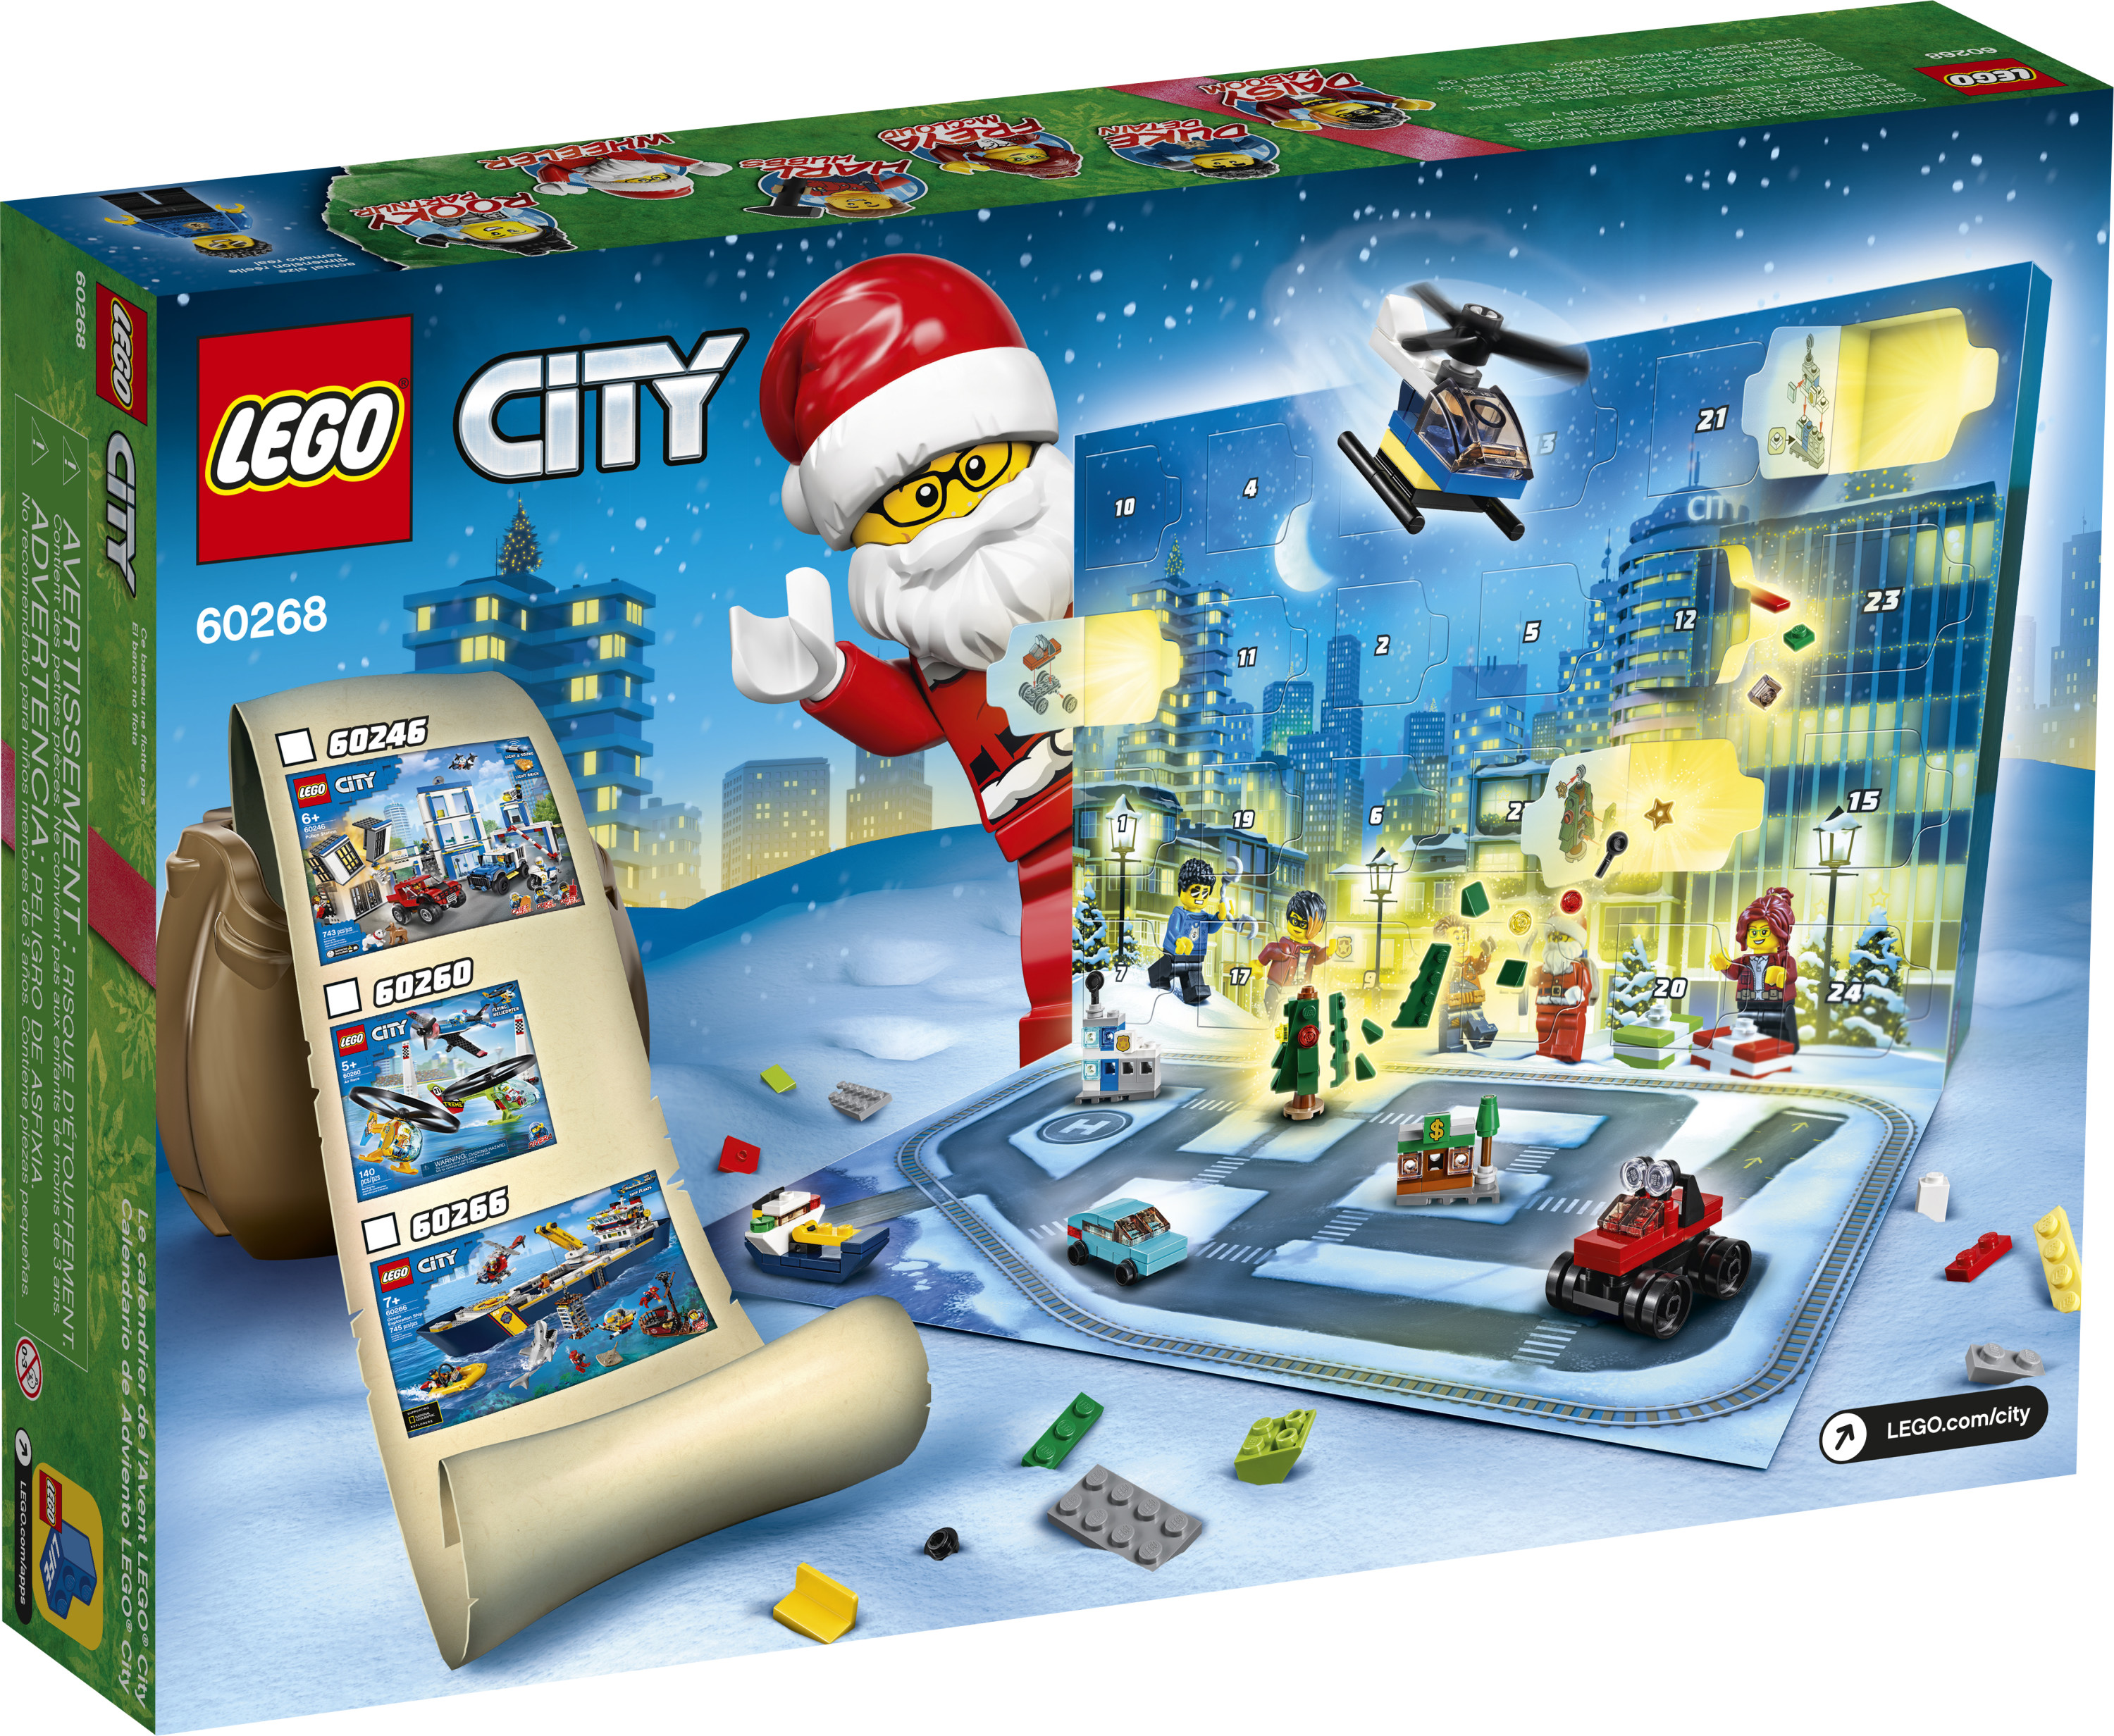 LEGO City Advent Calendar 60268, With City Play Mat, Best Festive Toys for Kids (342 Pieces) - image 5 of 7